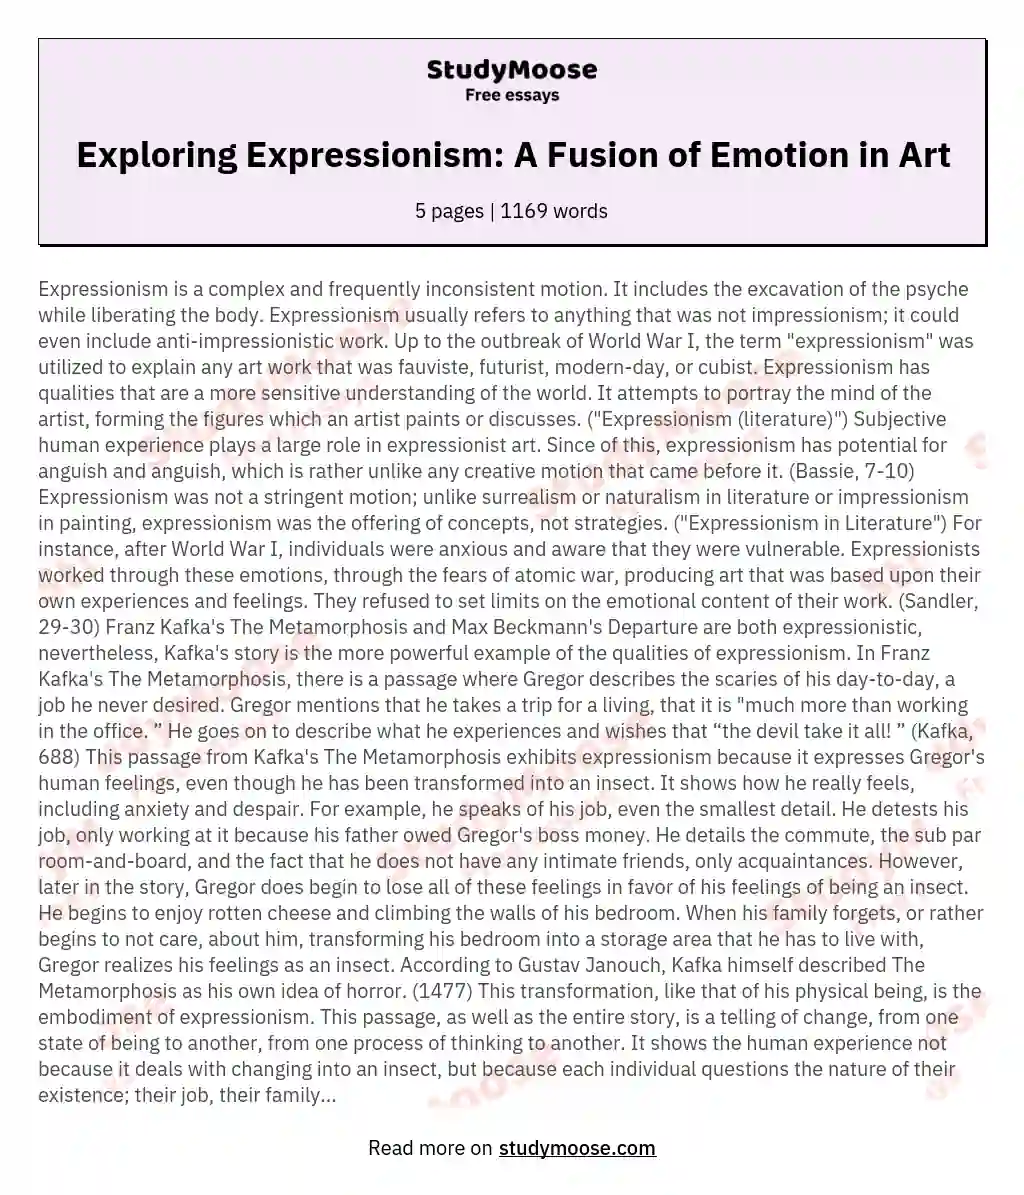 Exploring Expressionism: A Fusion of Emotion in Art essay